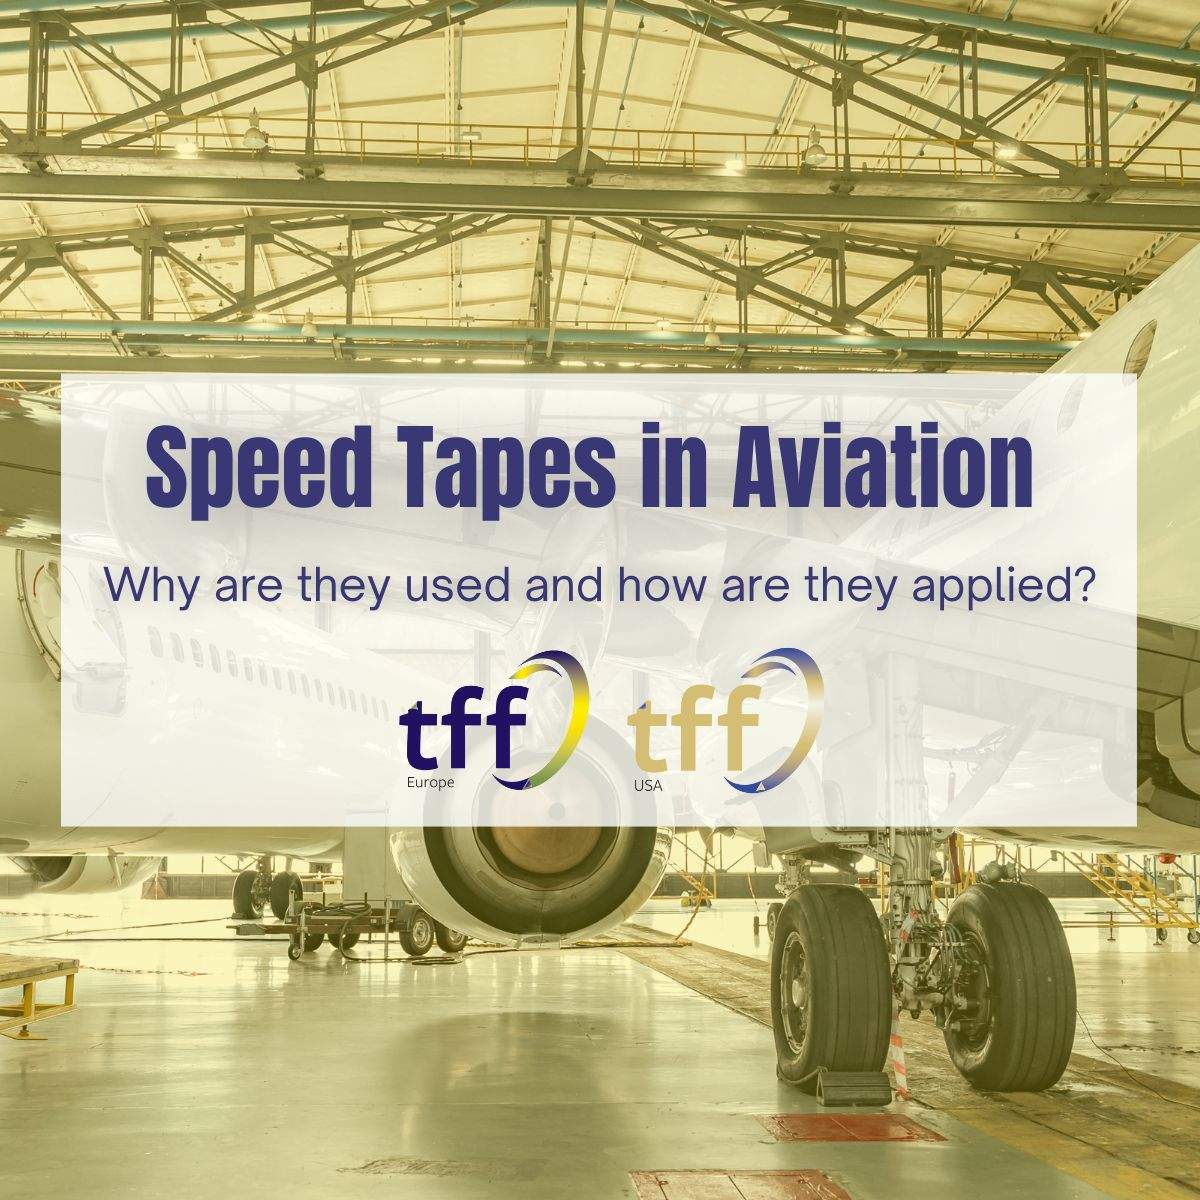 Speed Tapes in Aviation